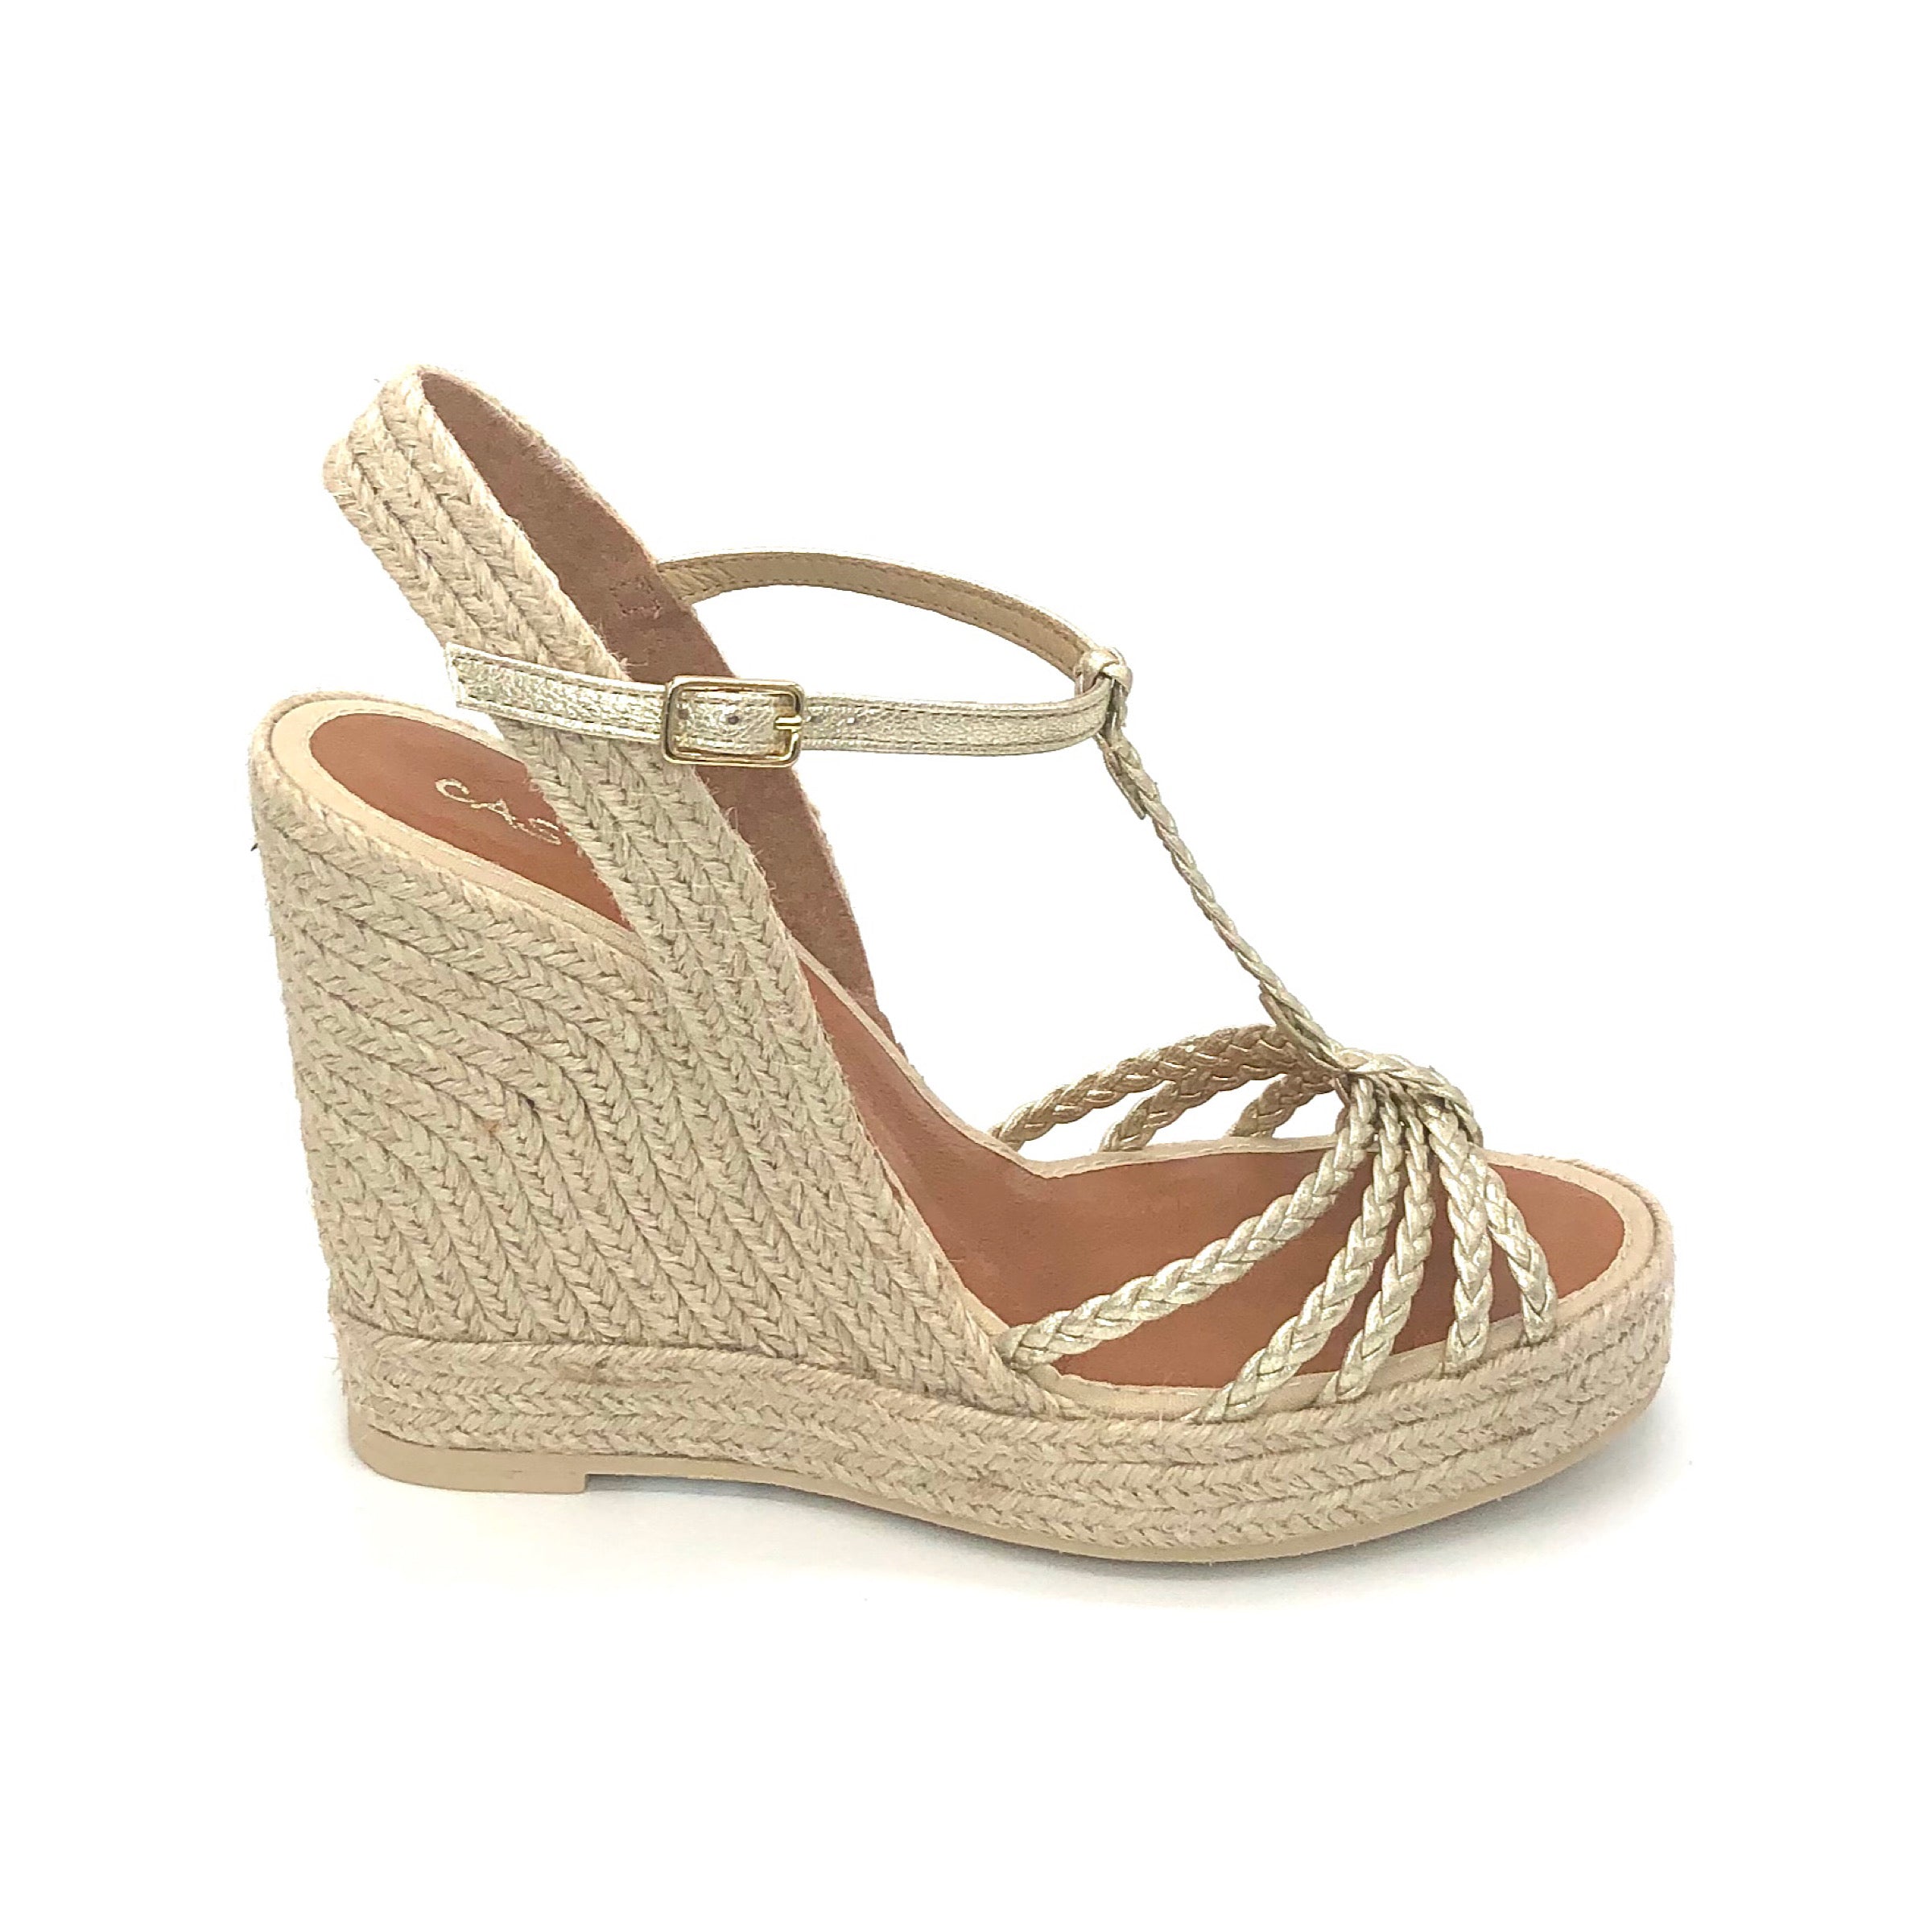 The Braided T-Strap Espadrille in Platino Metallic. This stunning multi braid t-strap sandal on high platform espadrille is a show stopper! The platino metallic thin straps instantly add hint of elegance to any outfit.